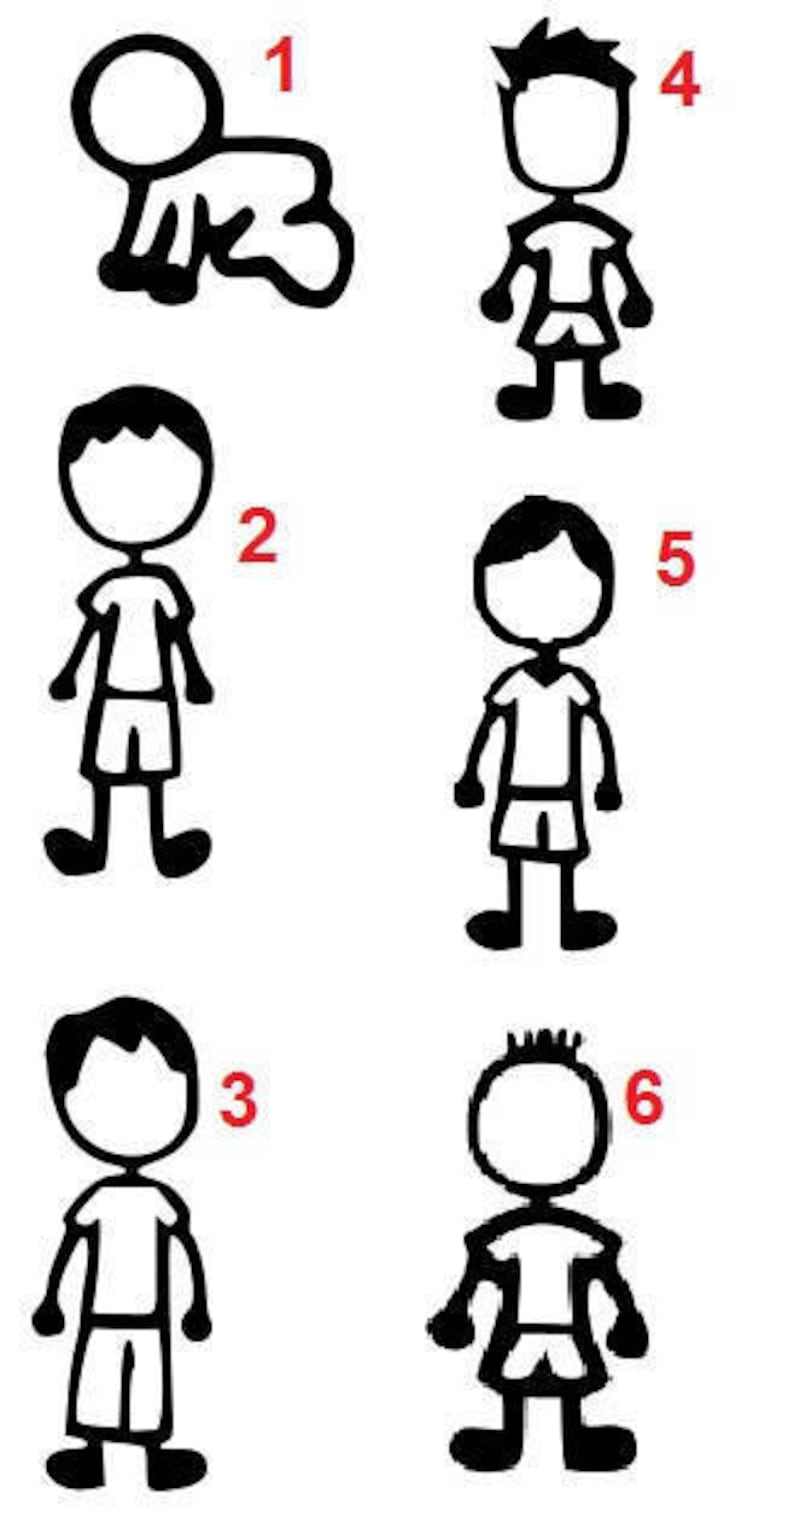 Boys Stick Figure Svg Cutting Files 6 Total Etsy